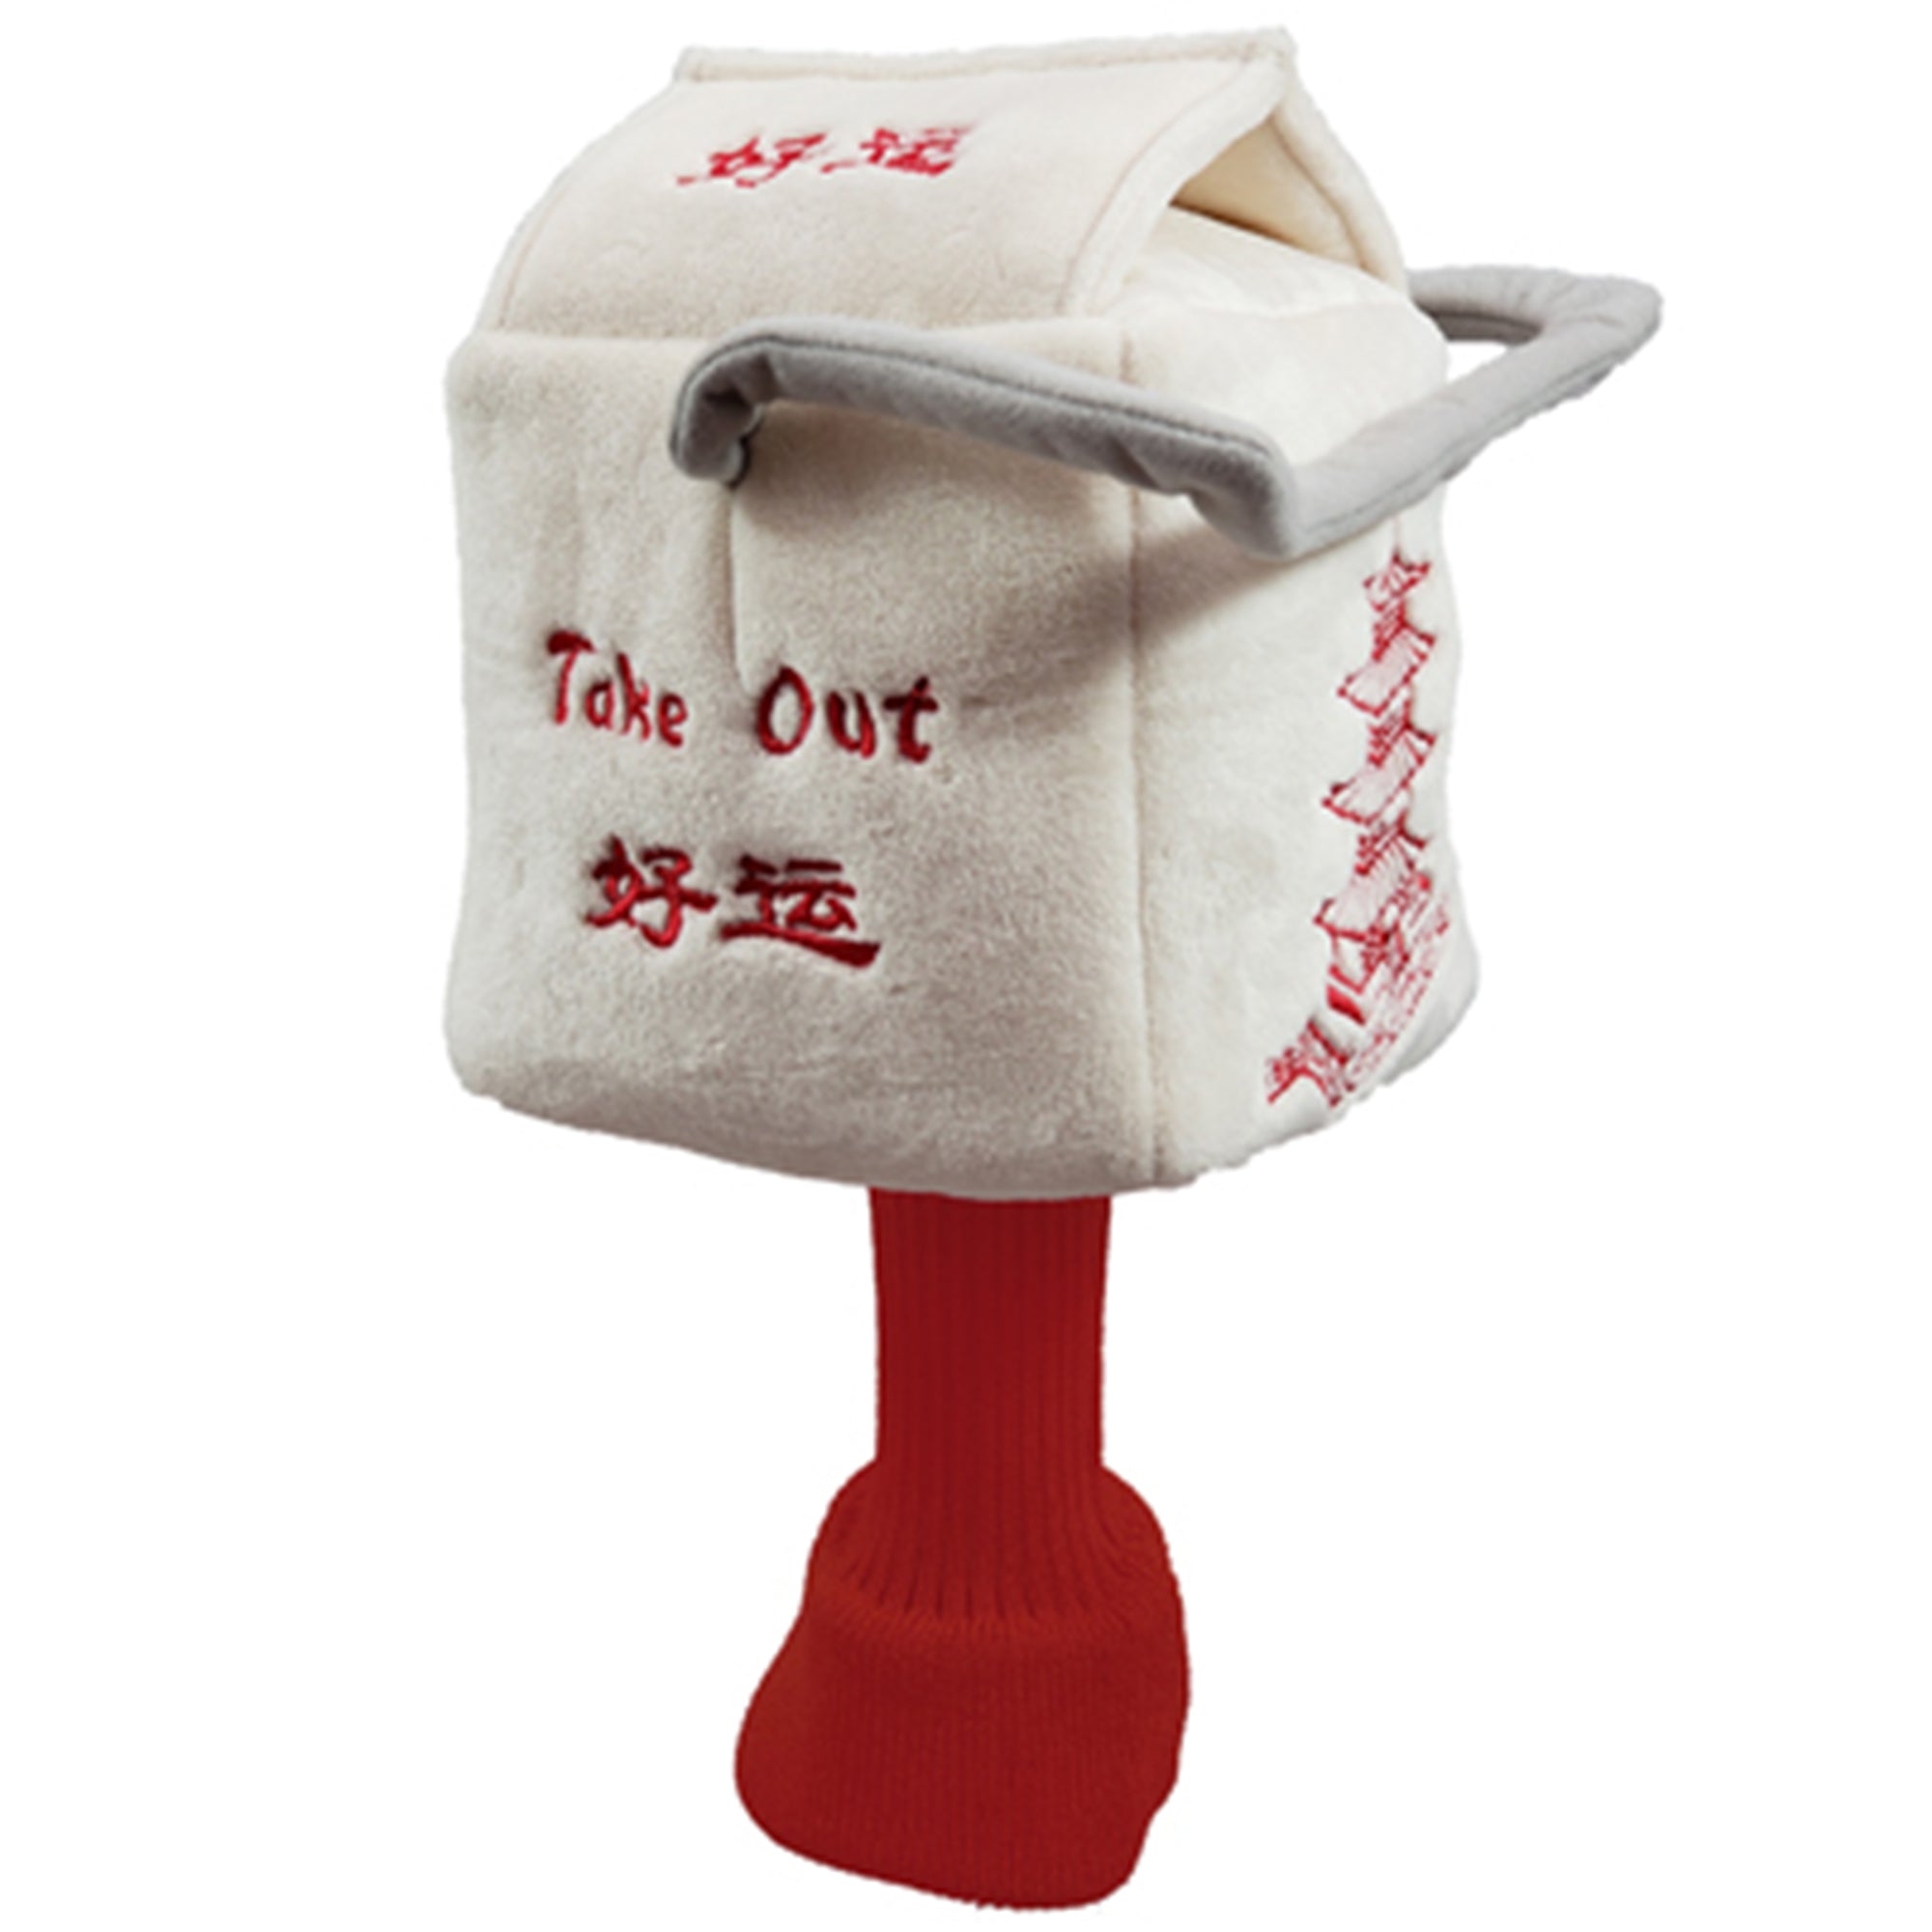 Daphne's Take Out Box Headcover